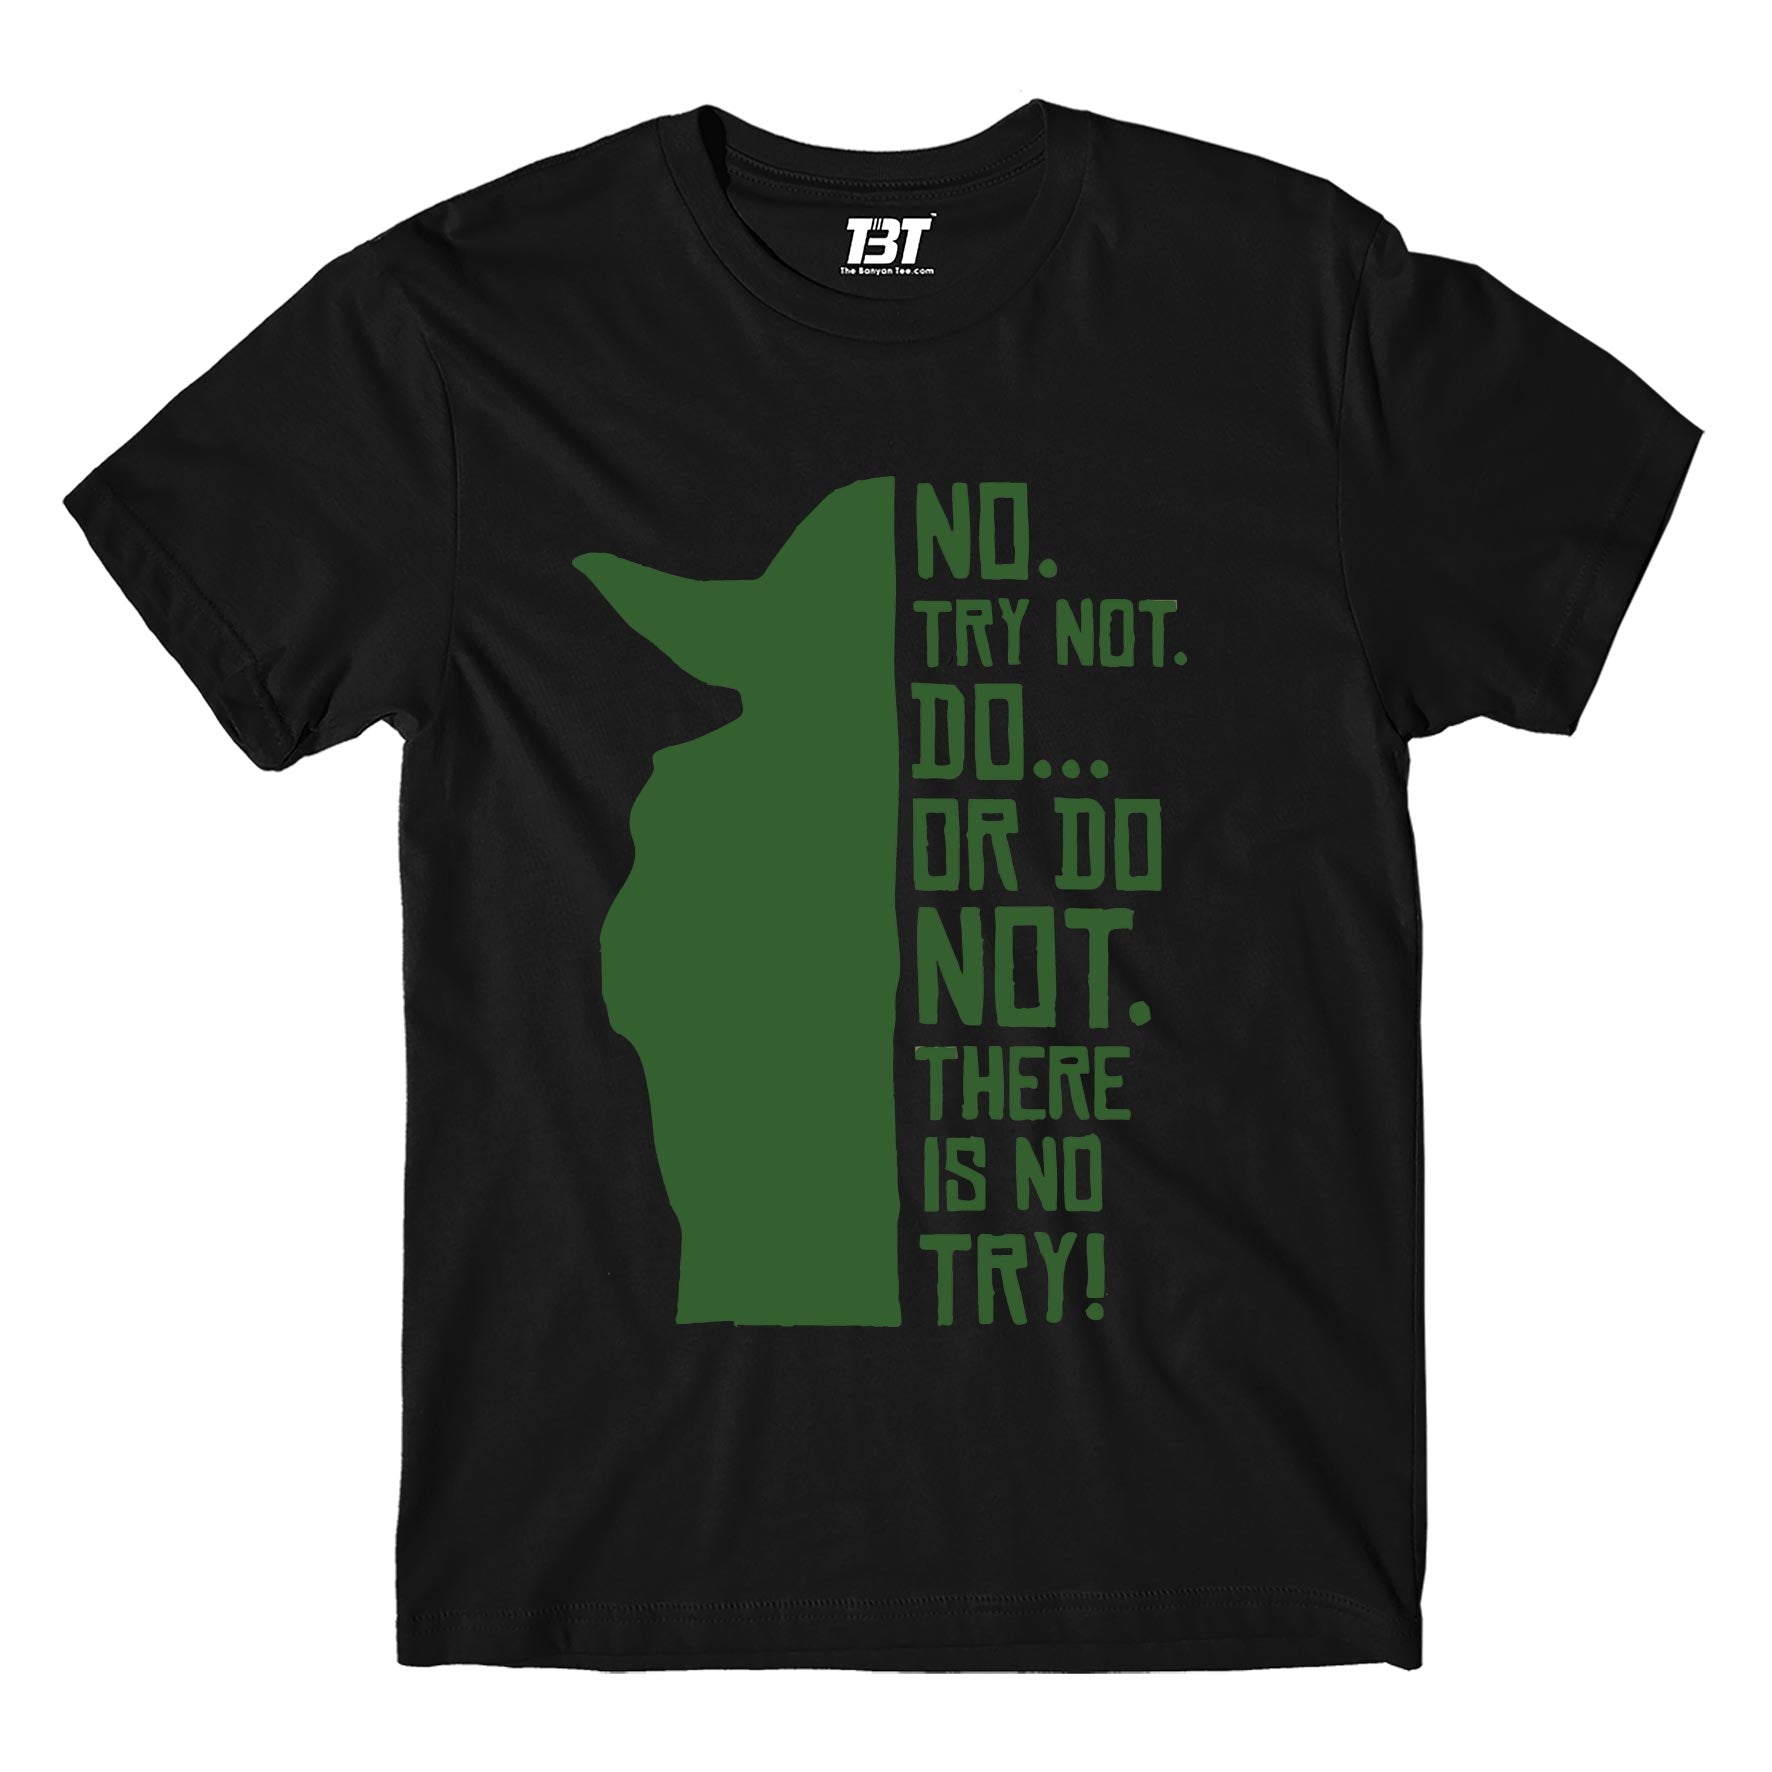 star wars there is no try t-shirt tv & movies buy online united states usa the banyan tee tbt men women girls boys unisex black yoda